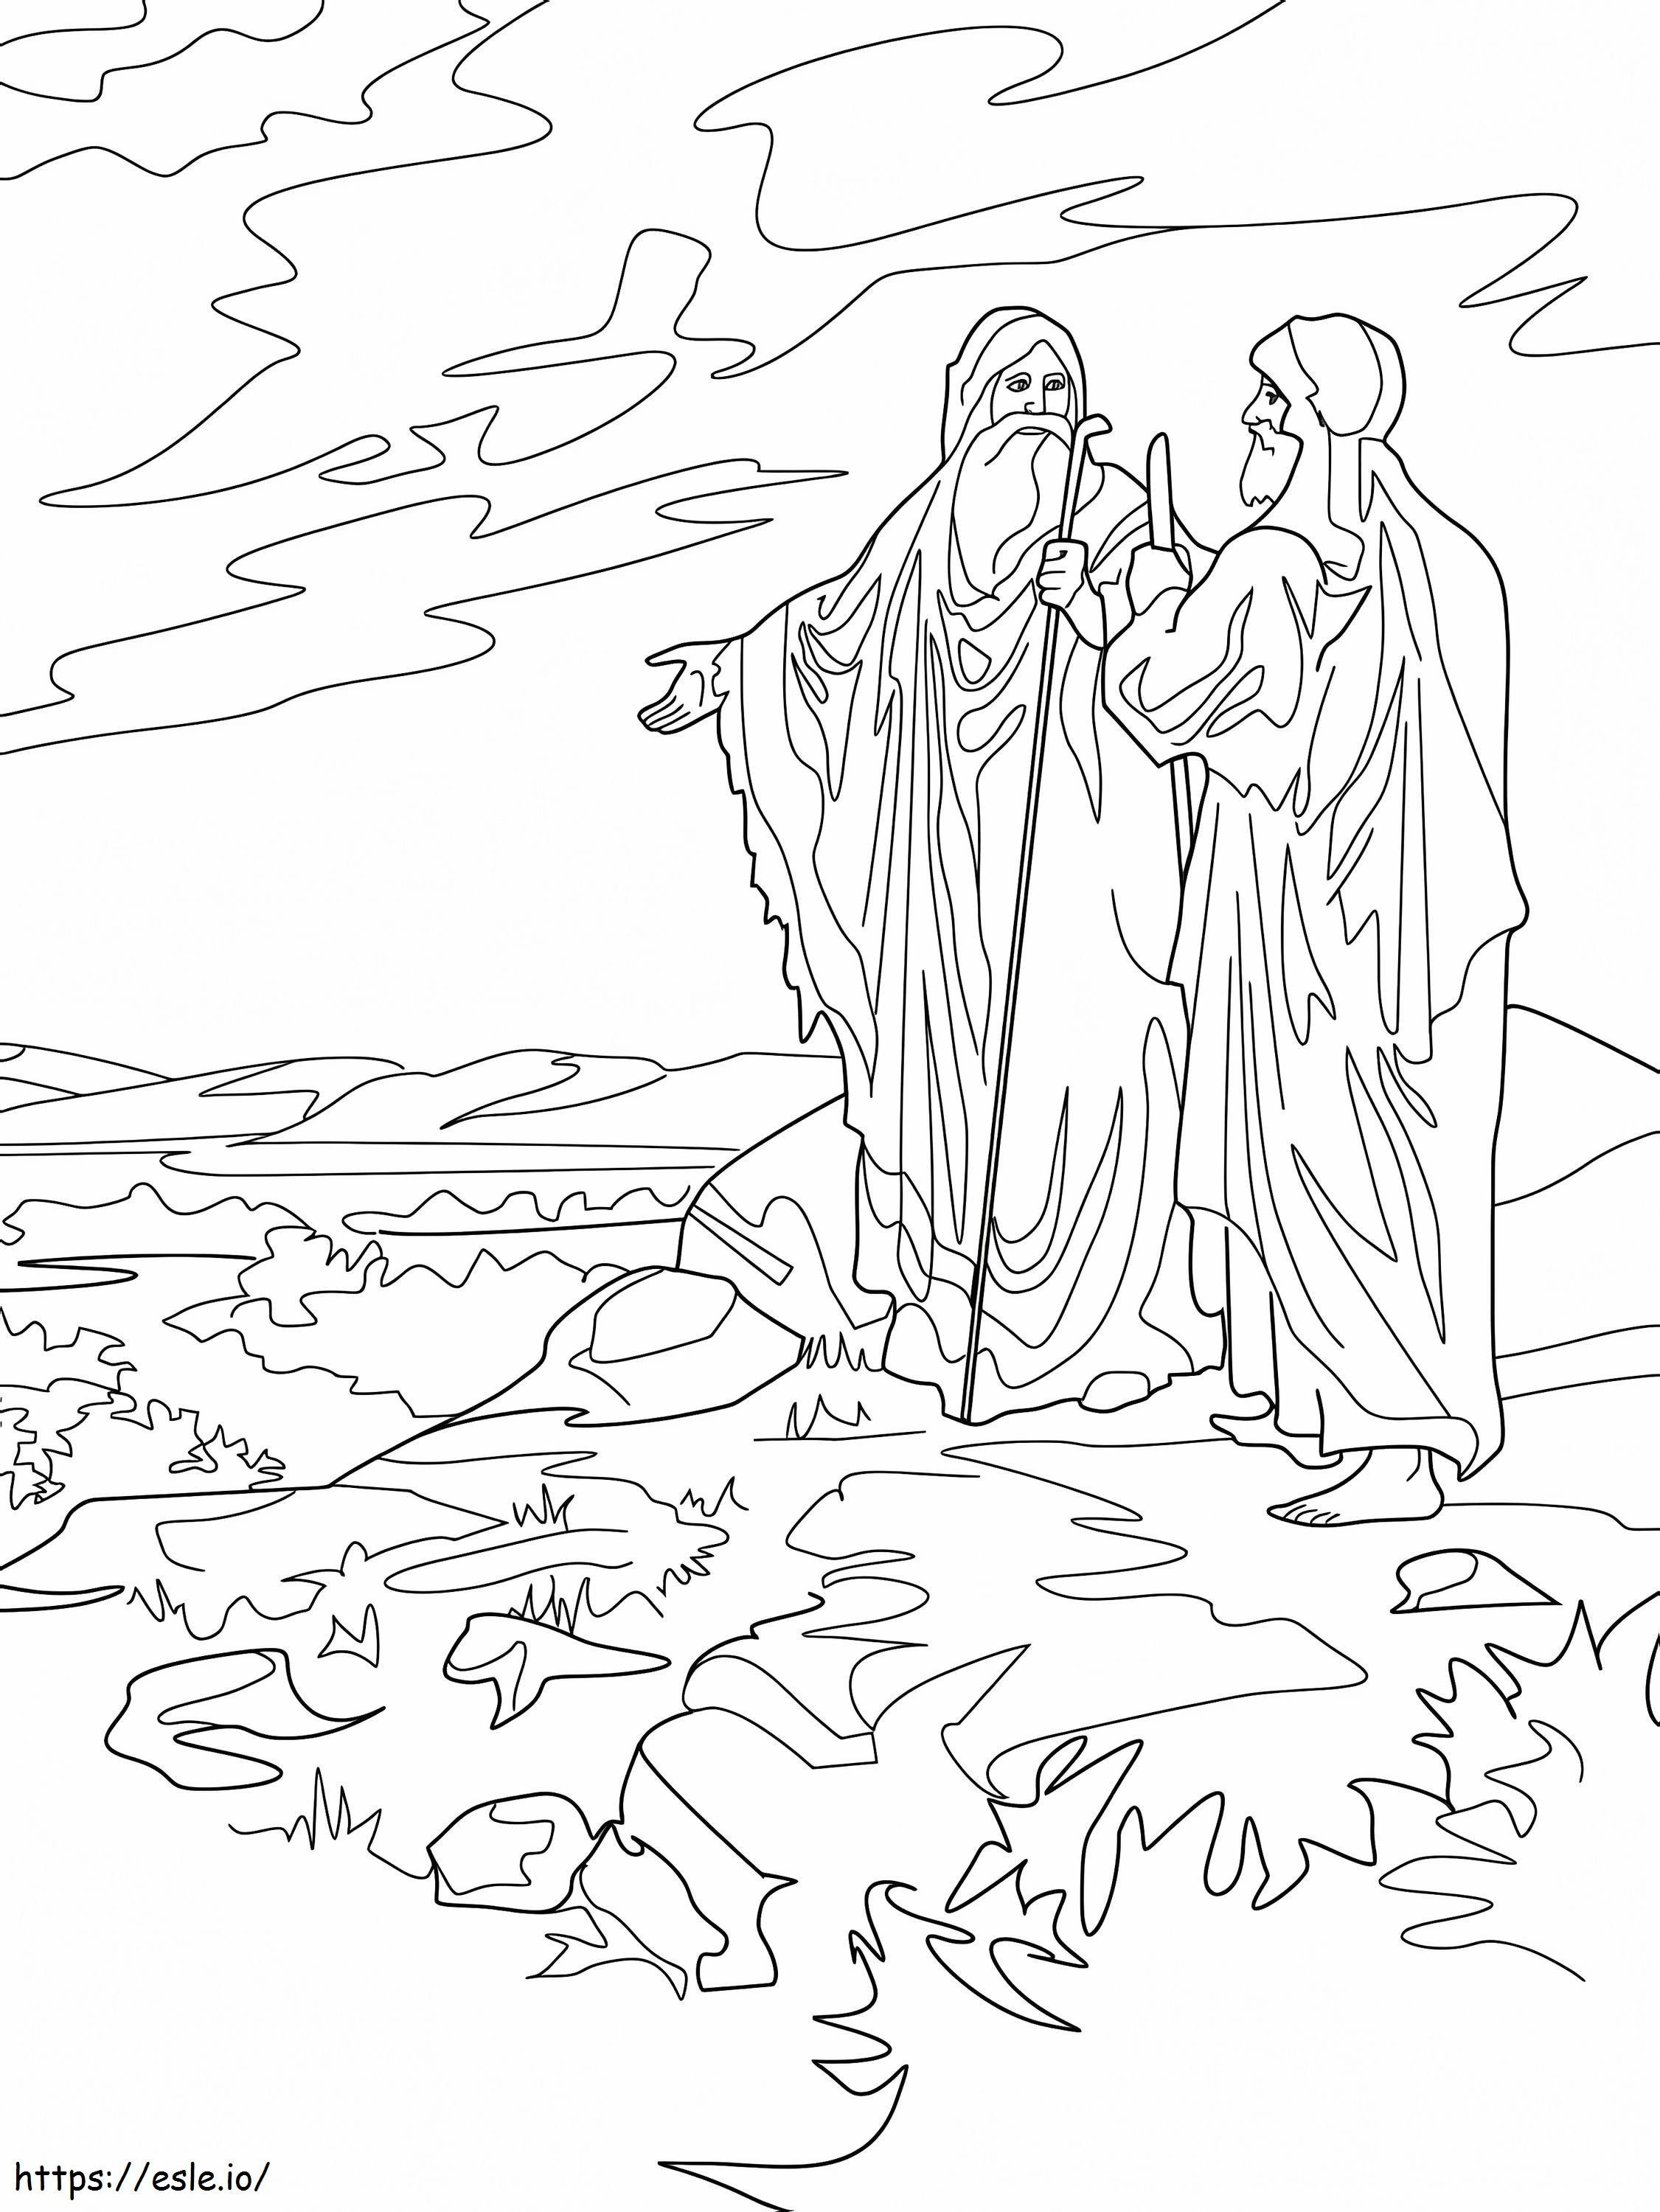 Abraham And Lot Part Ways coloring page